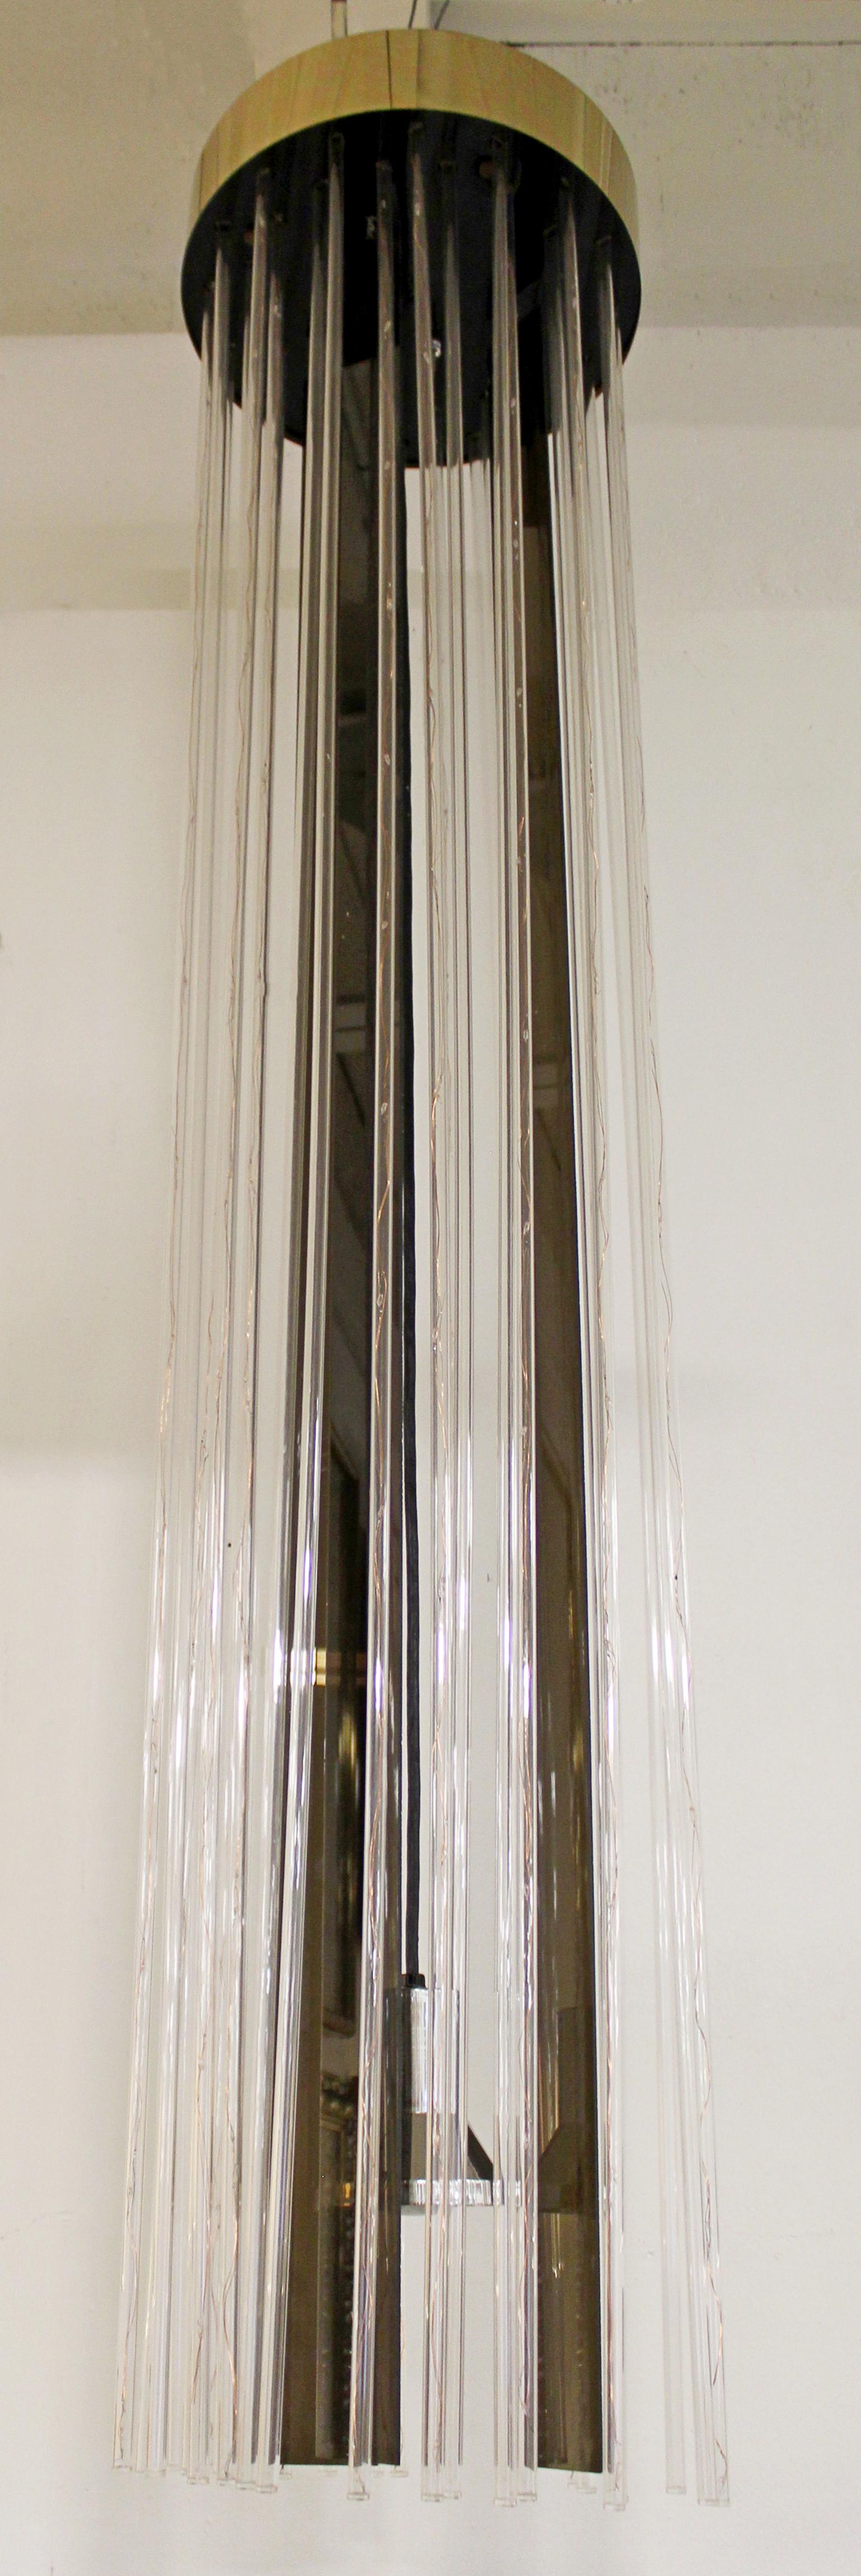 For your consideration is an absolutely fabulous, long hanging chandelier, made of brass and acrylic, circa the 1960s. In very good vintage condition. The dimensions are 16